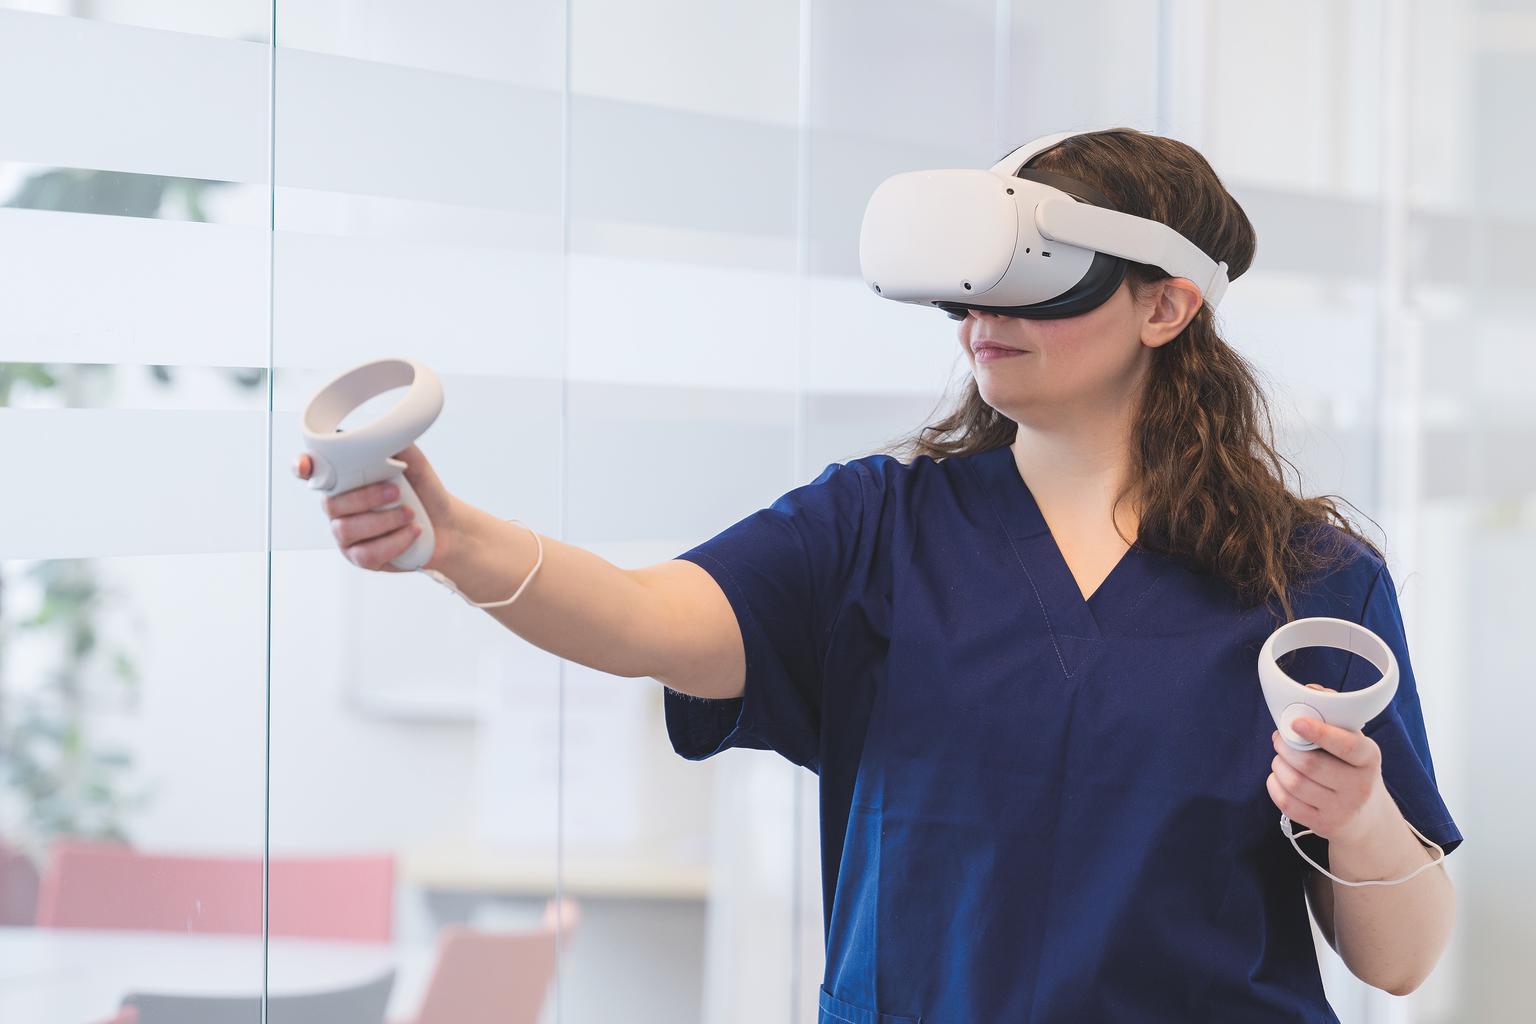 Help your students prepare for NCLEX® with immersive experiences